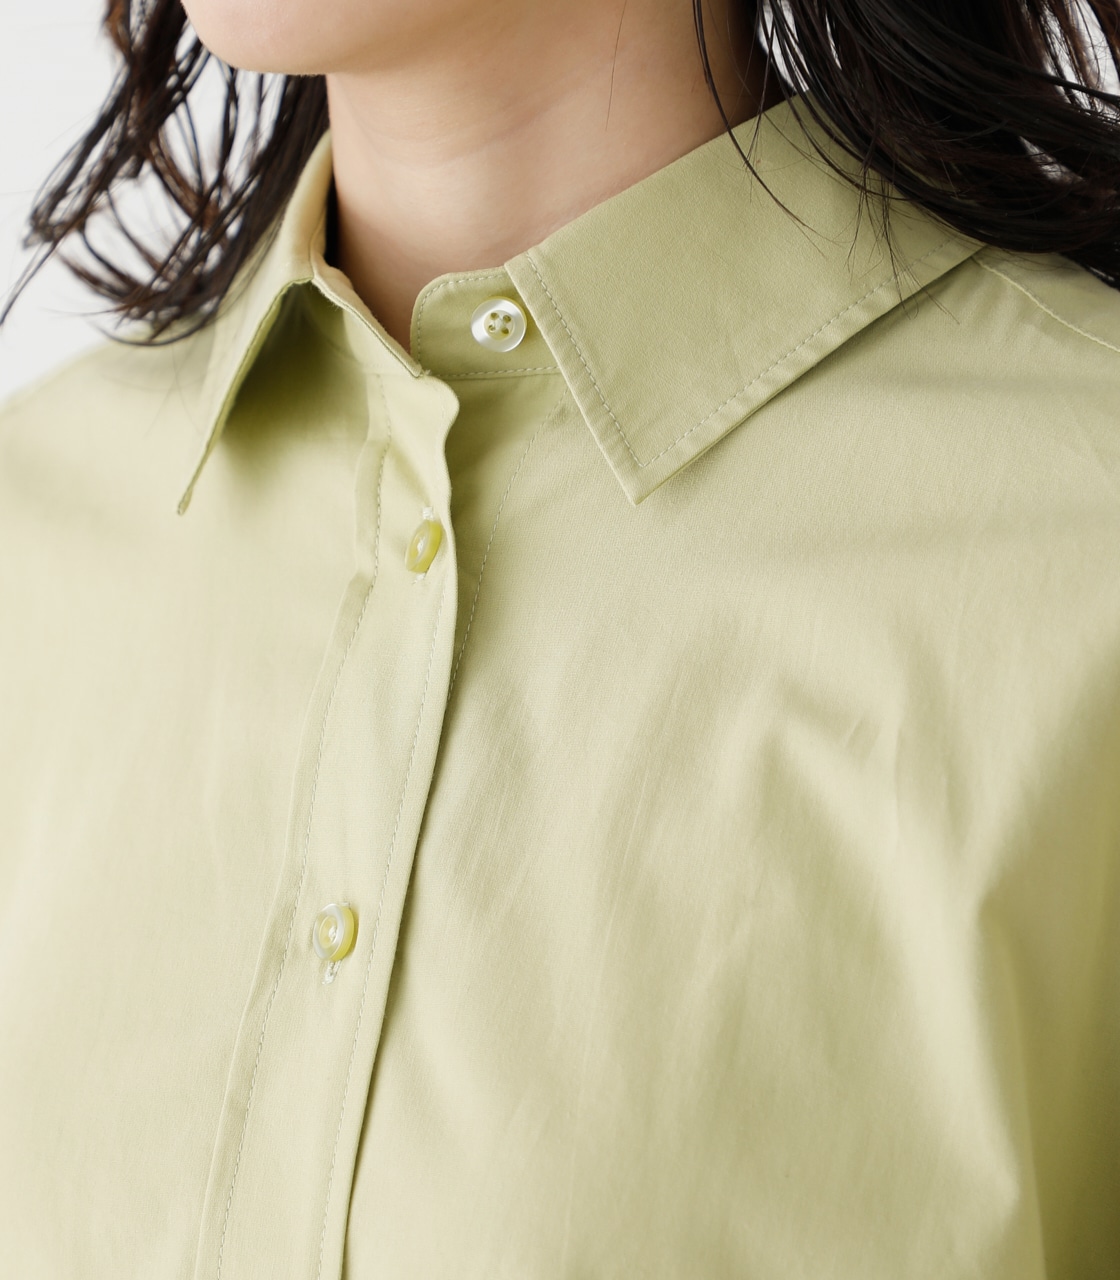 COLOR SIMPLE SHIRTS/カラーシンプルシャツ 詳細画像 LIME 8